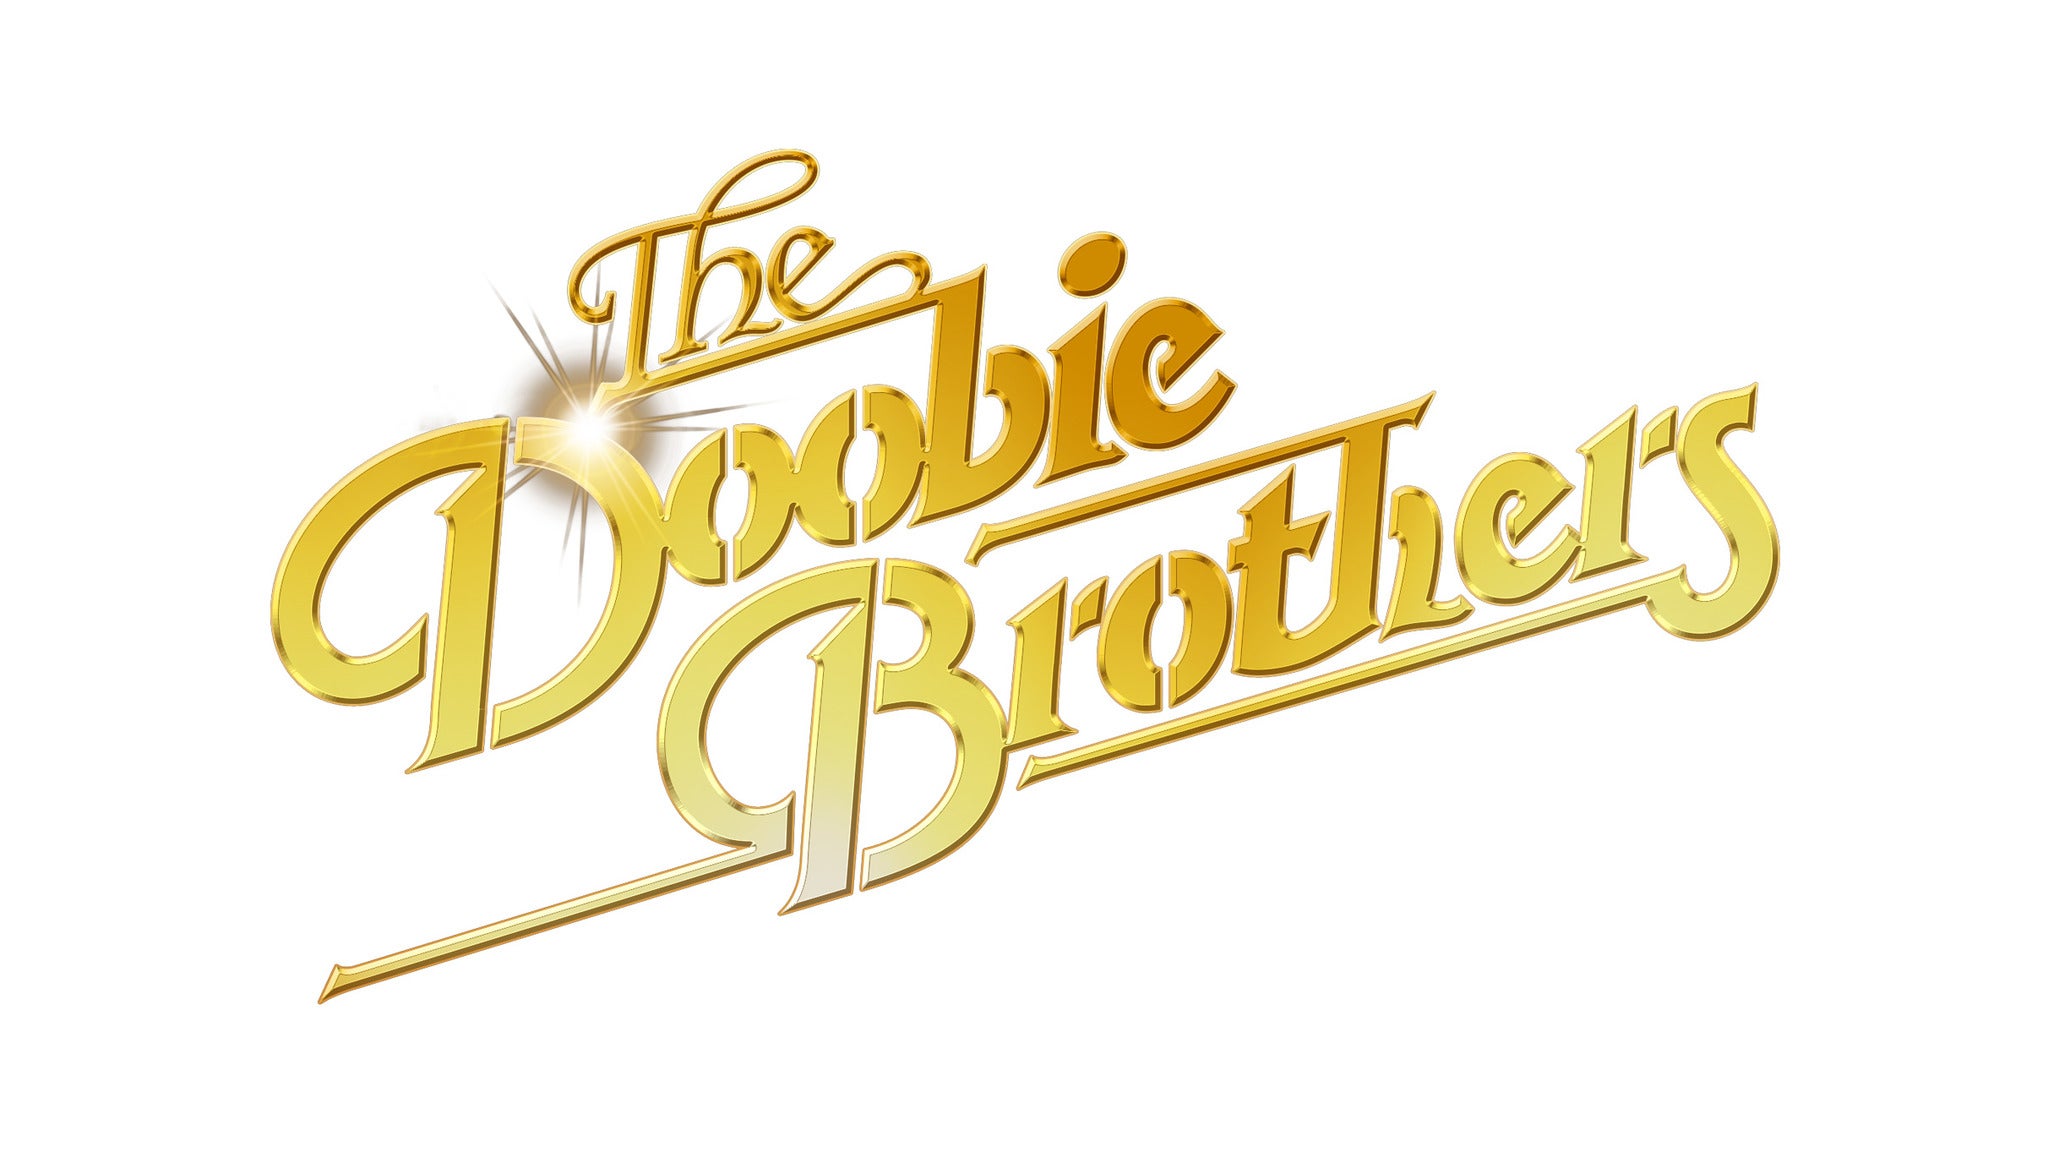 Image used with permission from Ticketmaster | The Doobie Brothers tickets